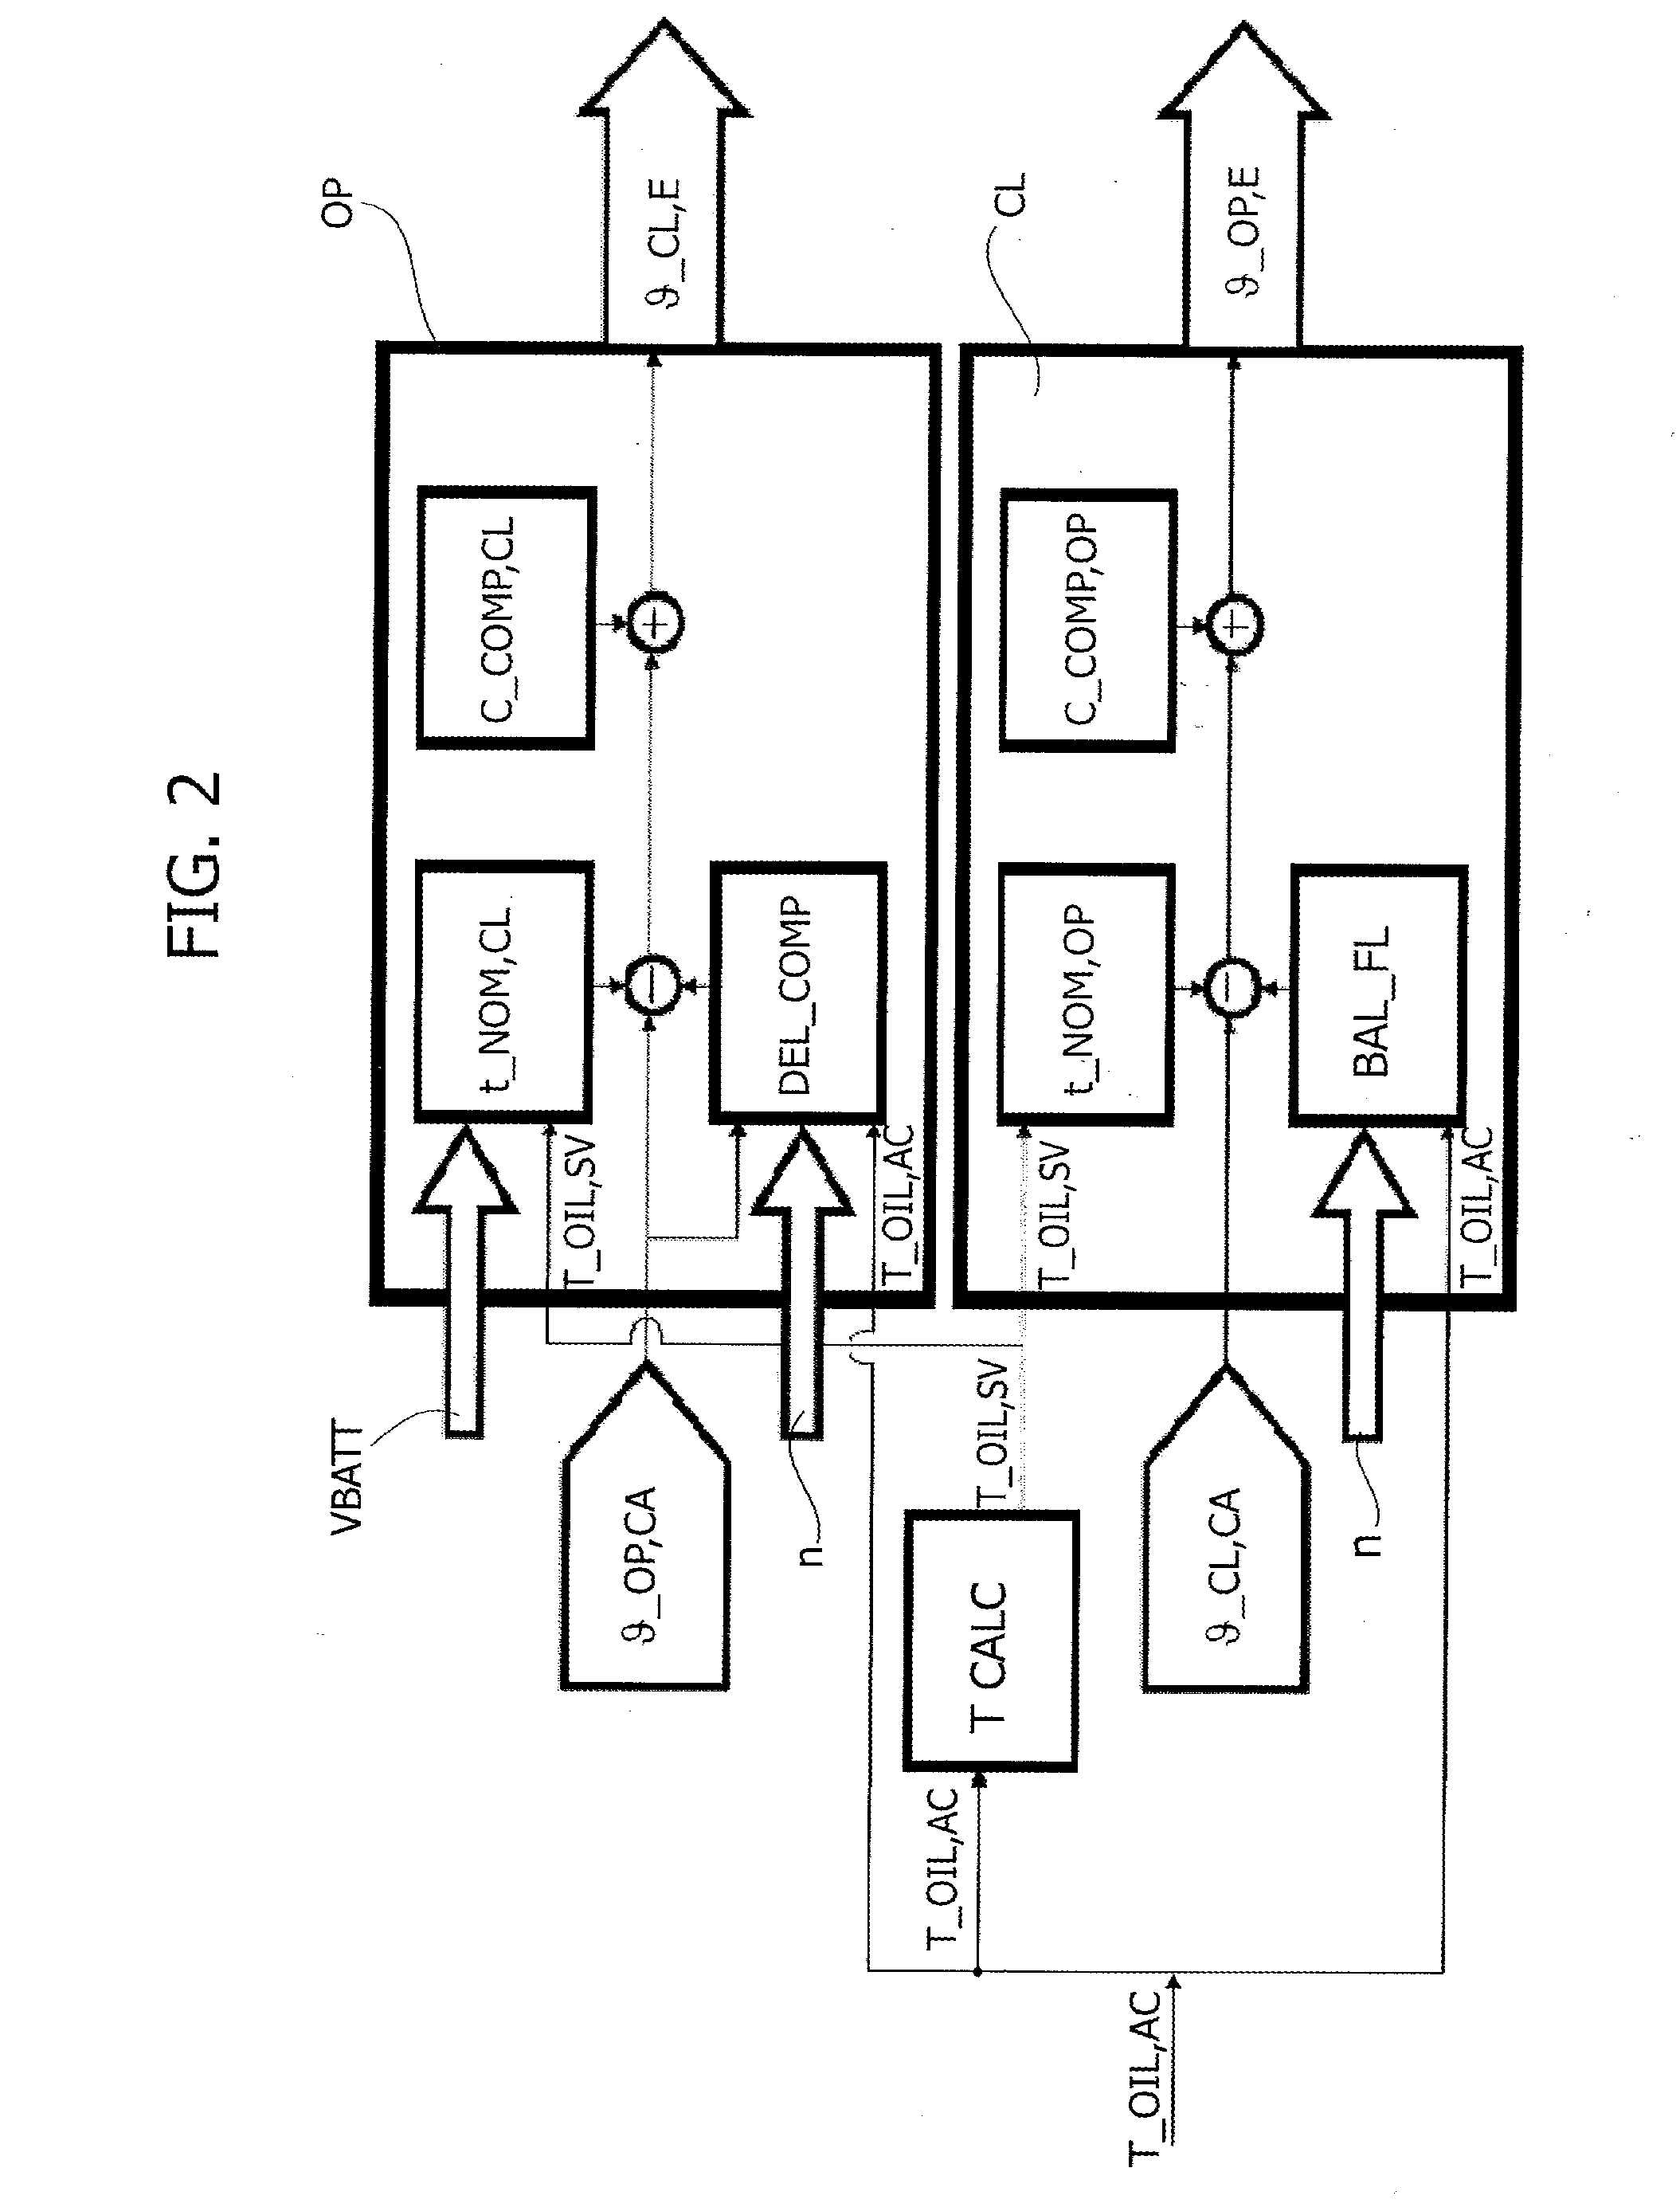 Method for controlling a valve control system with variable valve lift of an internal combustion engine by operating a compensation in response to the deviation of the characteristics of a working fluid with respect to nominal conditions